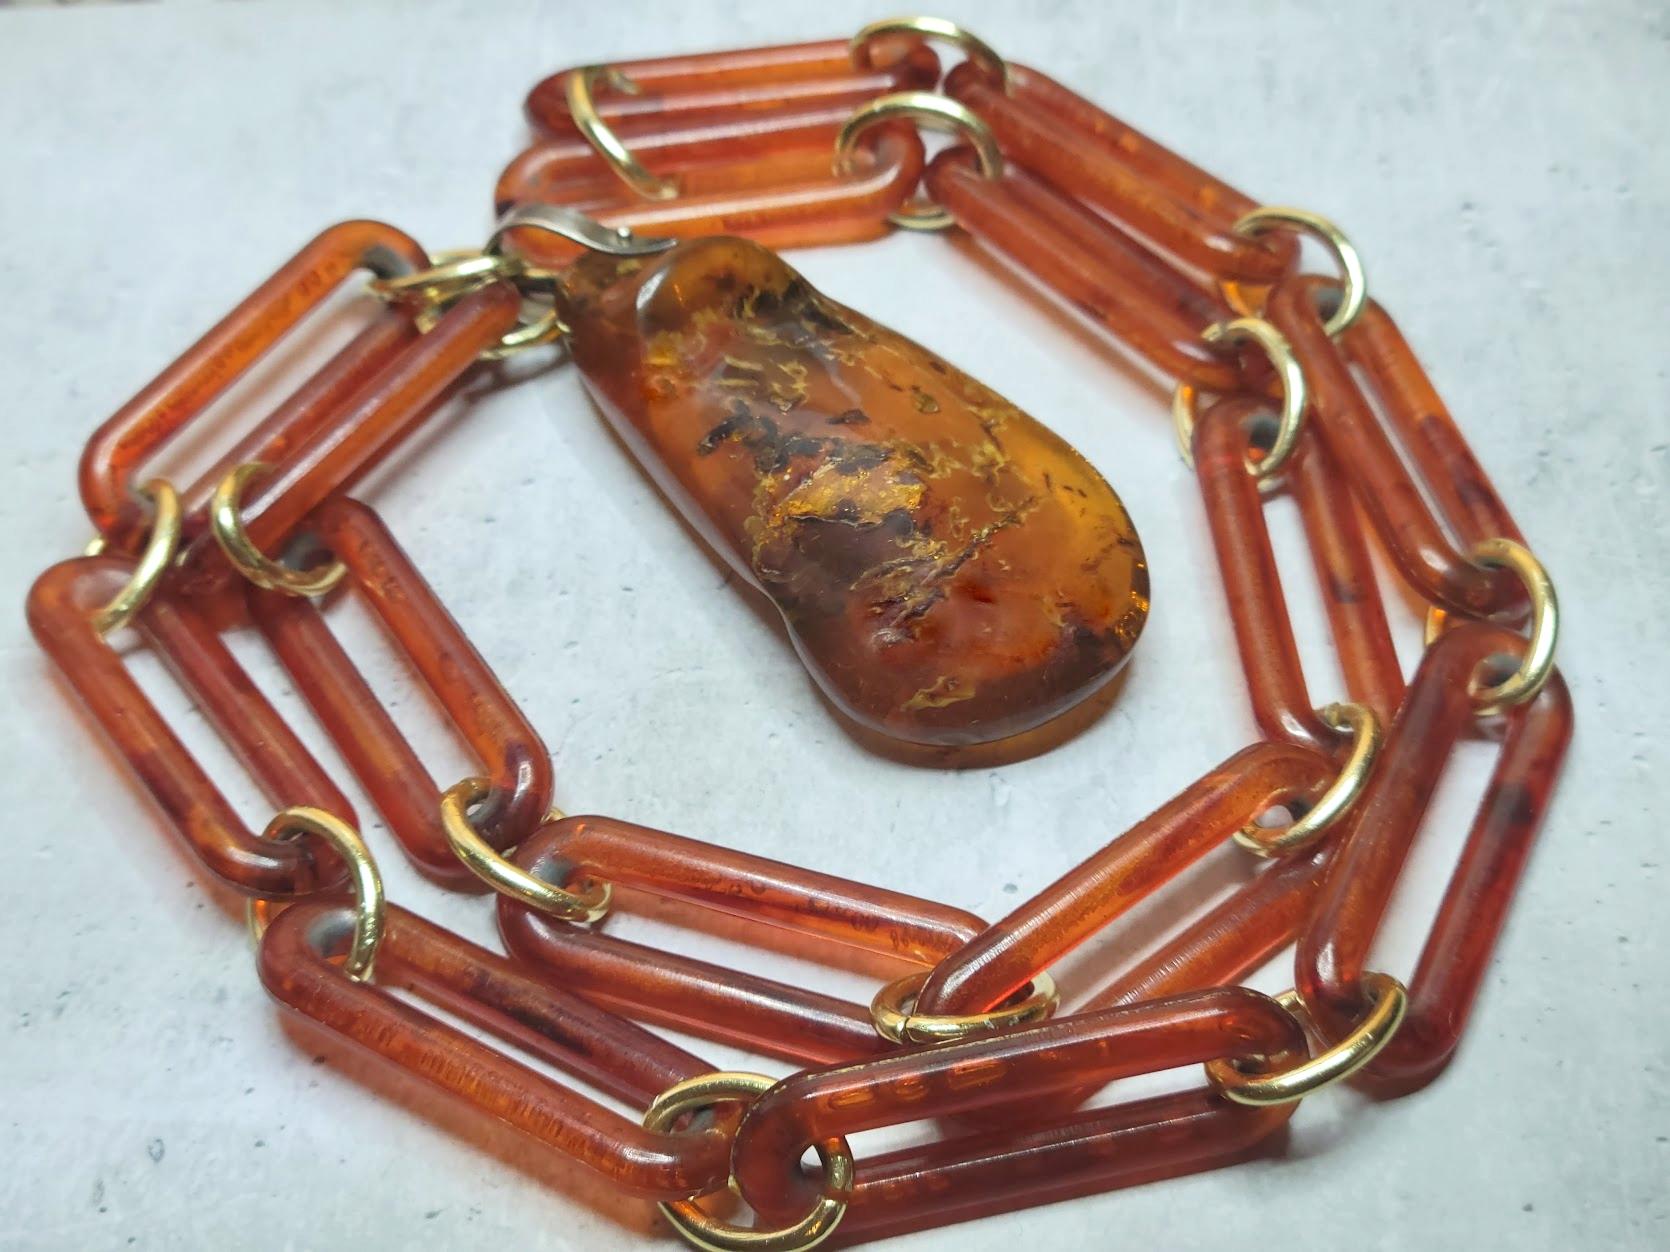 Fabulous genuine Baltic Amber pendant necklace period art deco, 1920.
The length of the chain necklace is 32 inches (81 cm). The chain is made of old plastic.
The size of the amber pendant is 3 inches (7.6cm). Extraordinary amber size.
The weight of